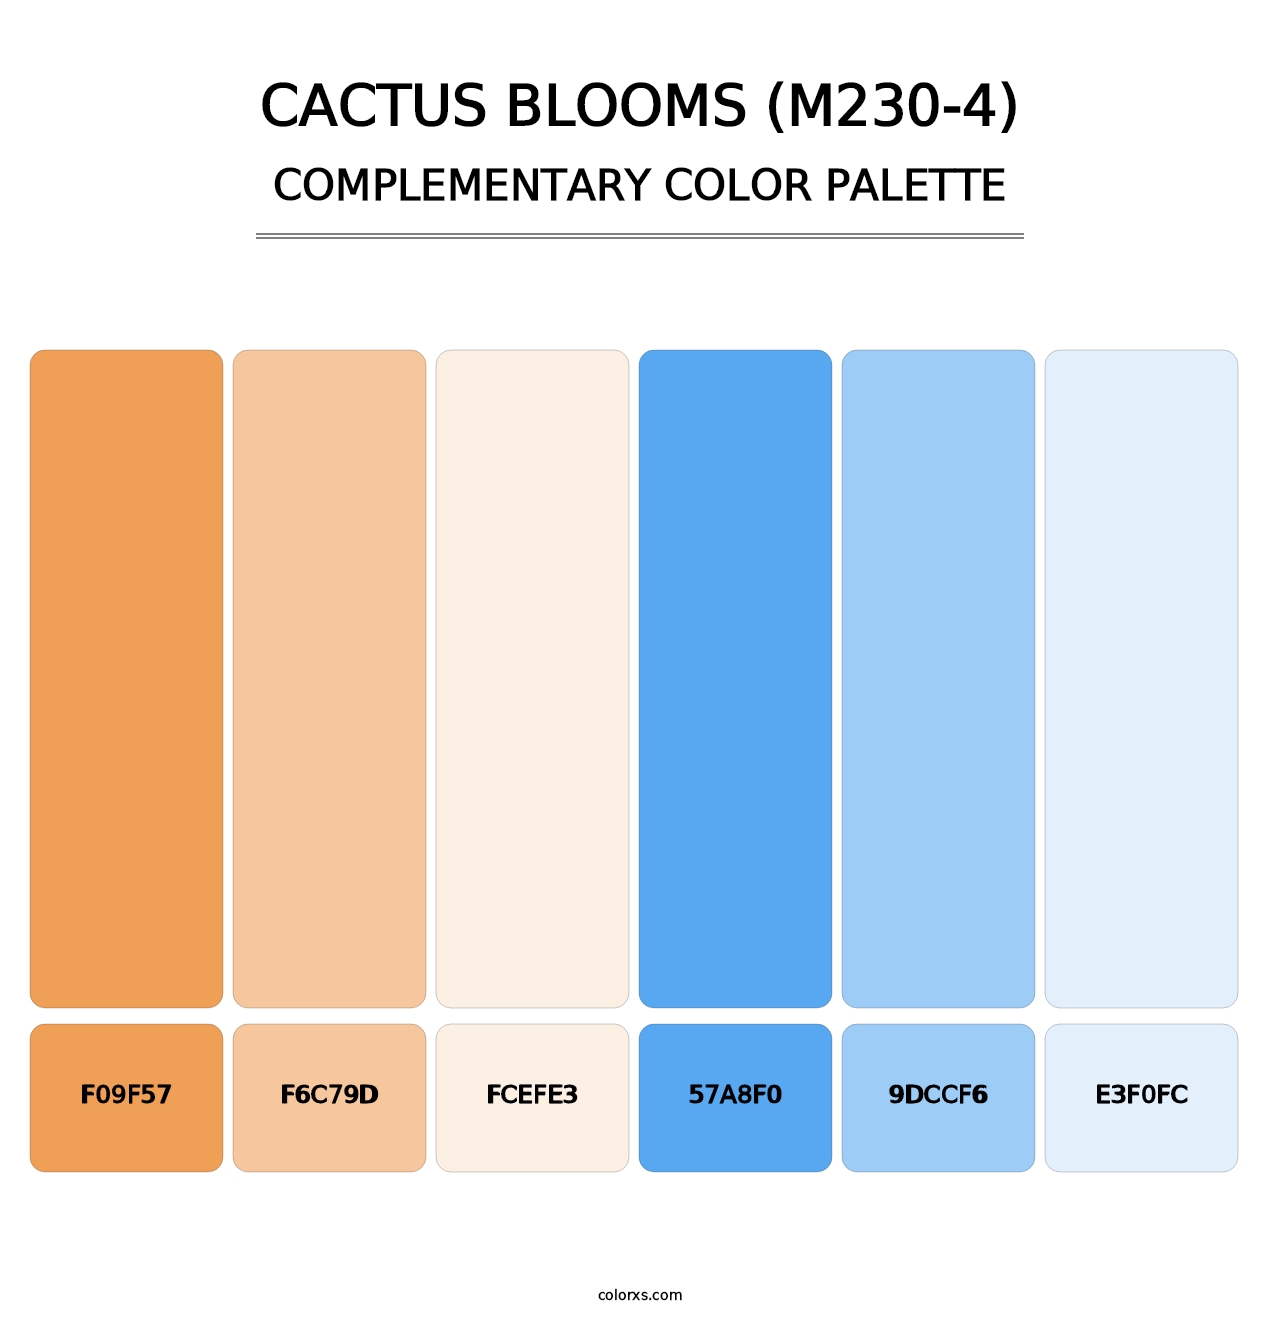 Cactus Blooms (M230-4) - Complementary Color Palette